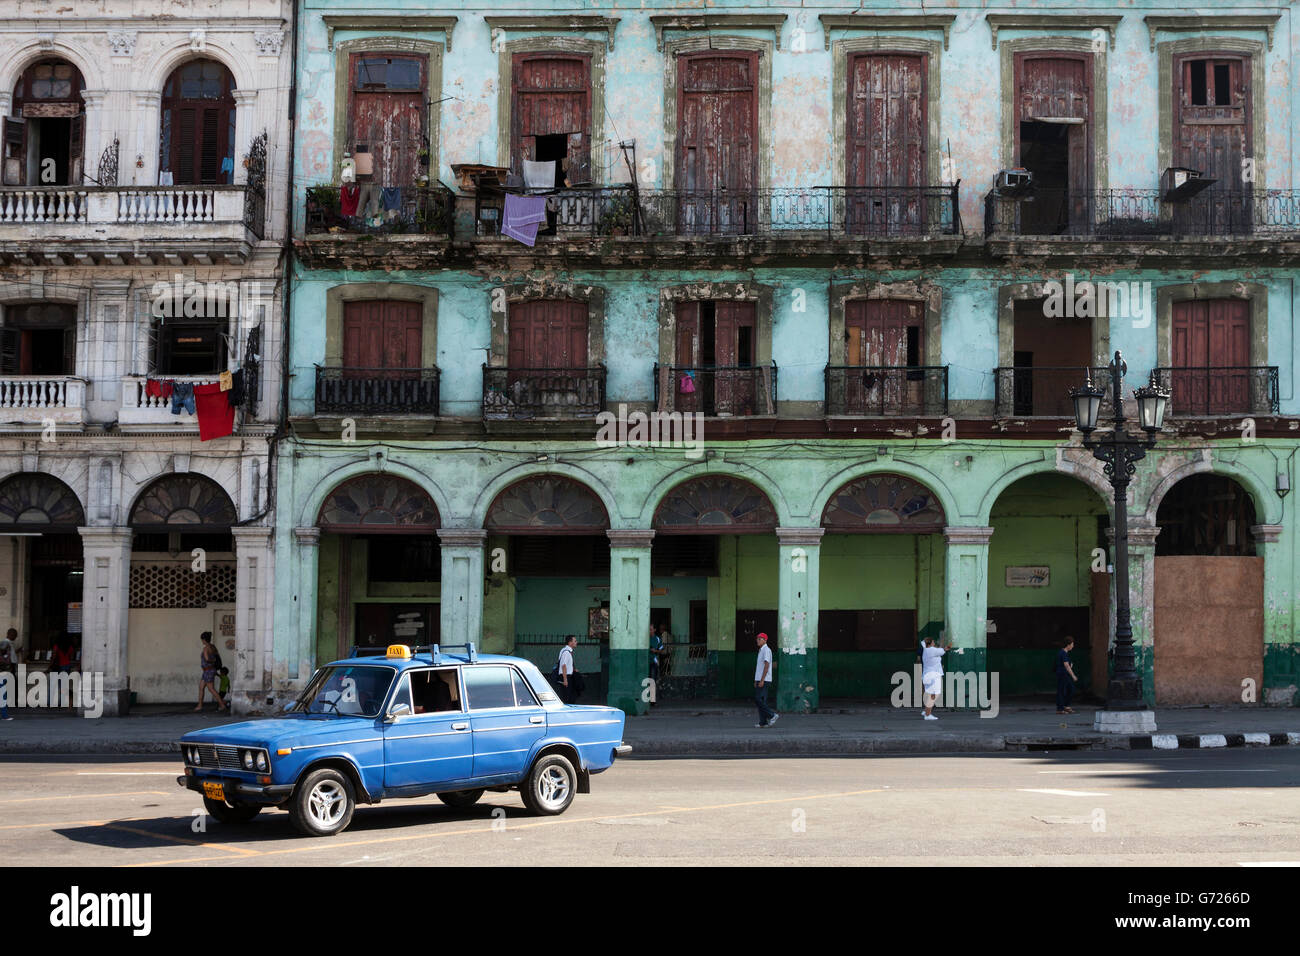 Street scenery, blue vintage taxi, cab in front of shabby frontages, historic centre, Havana, Cuba Stock Photo